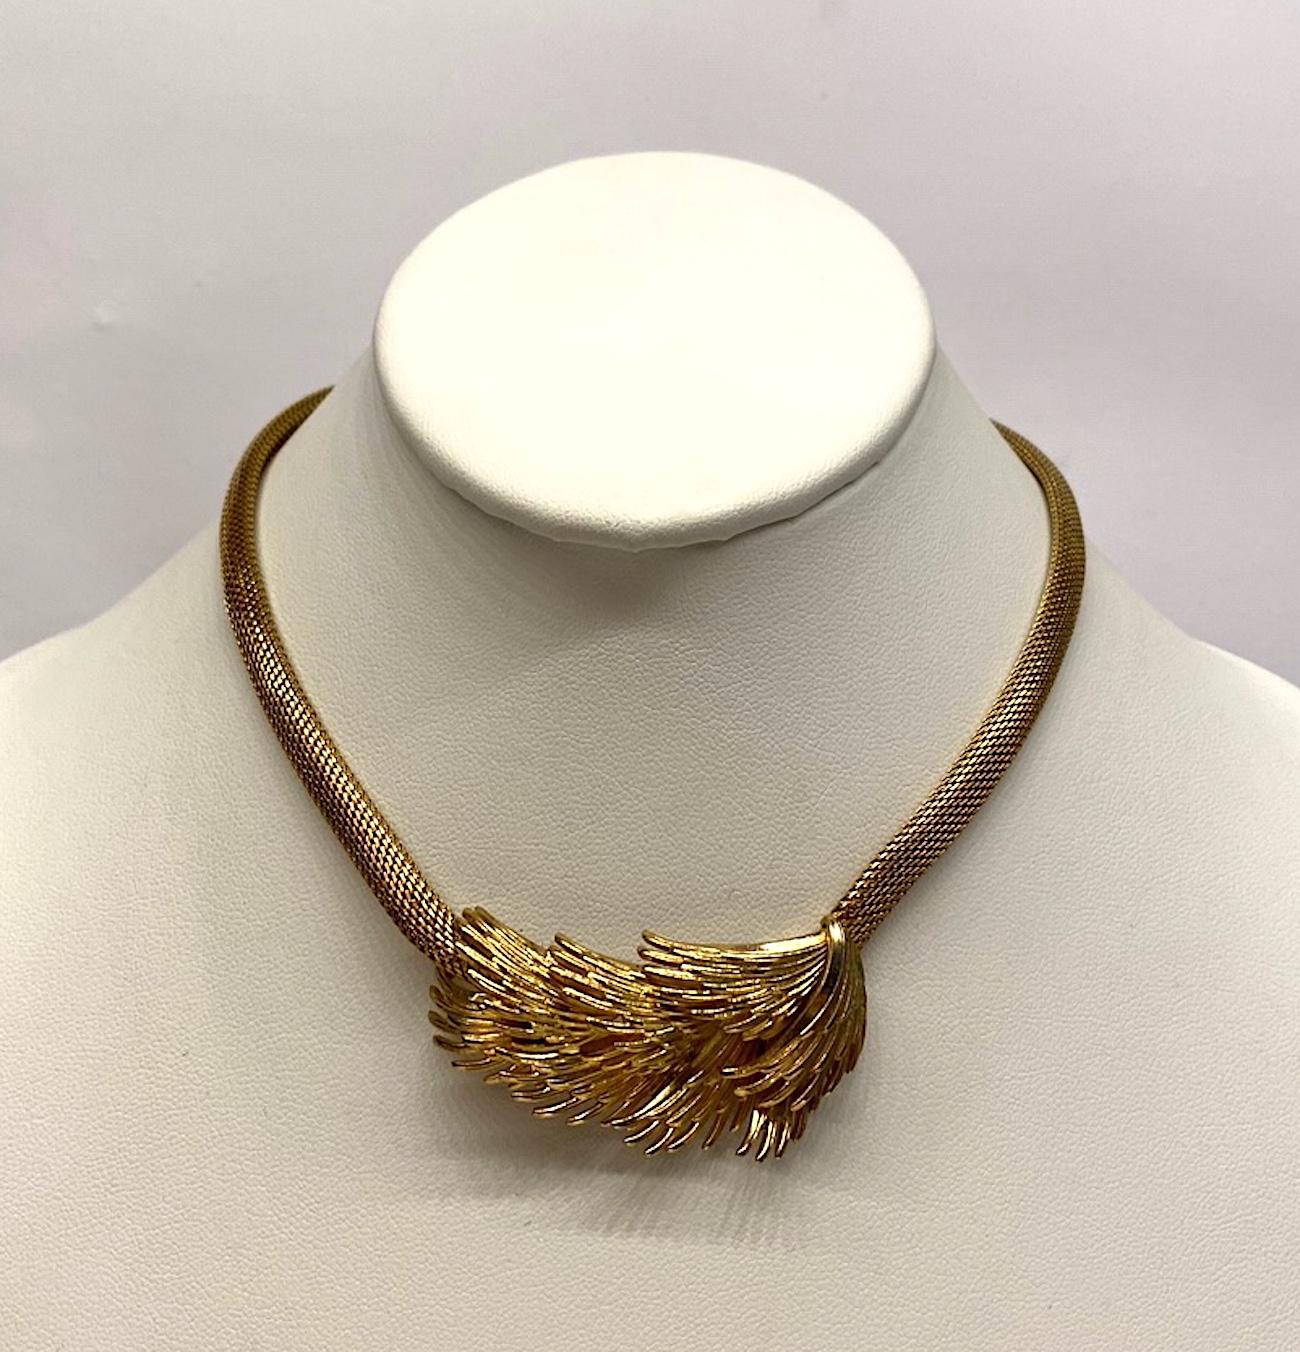 A lovely Grosse Germany necklace produced in 1966. It consists of a finely woven mesh strand with three dimensional abstract center piece of overlapping wings. The mesh strands are .25 of an inch wide. The center piece measures 2 inches wide and 1